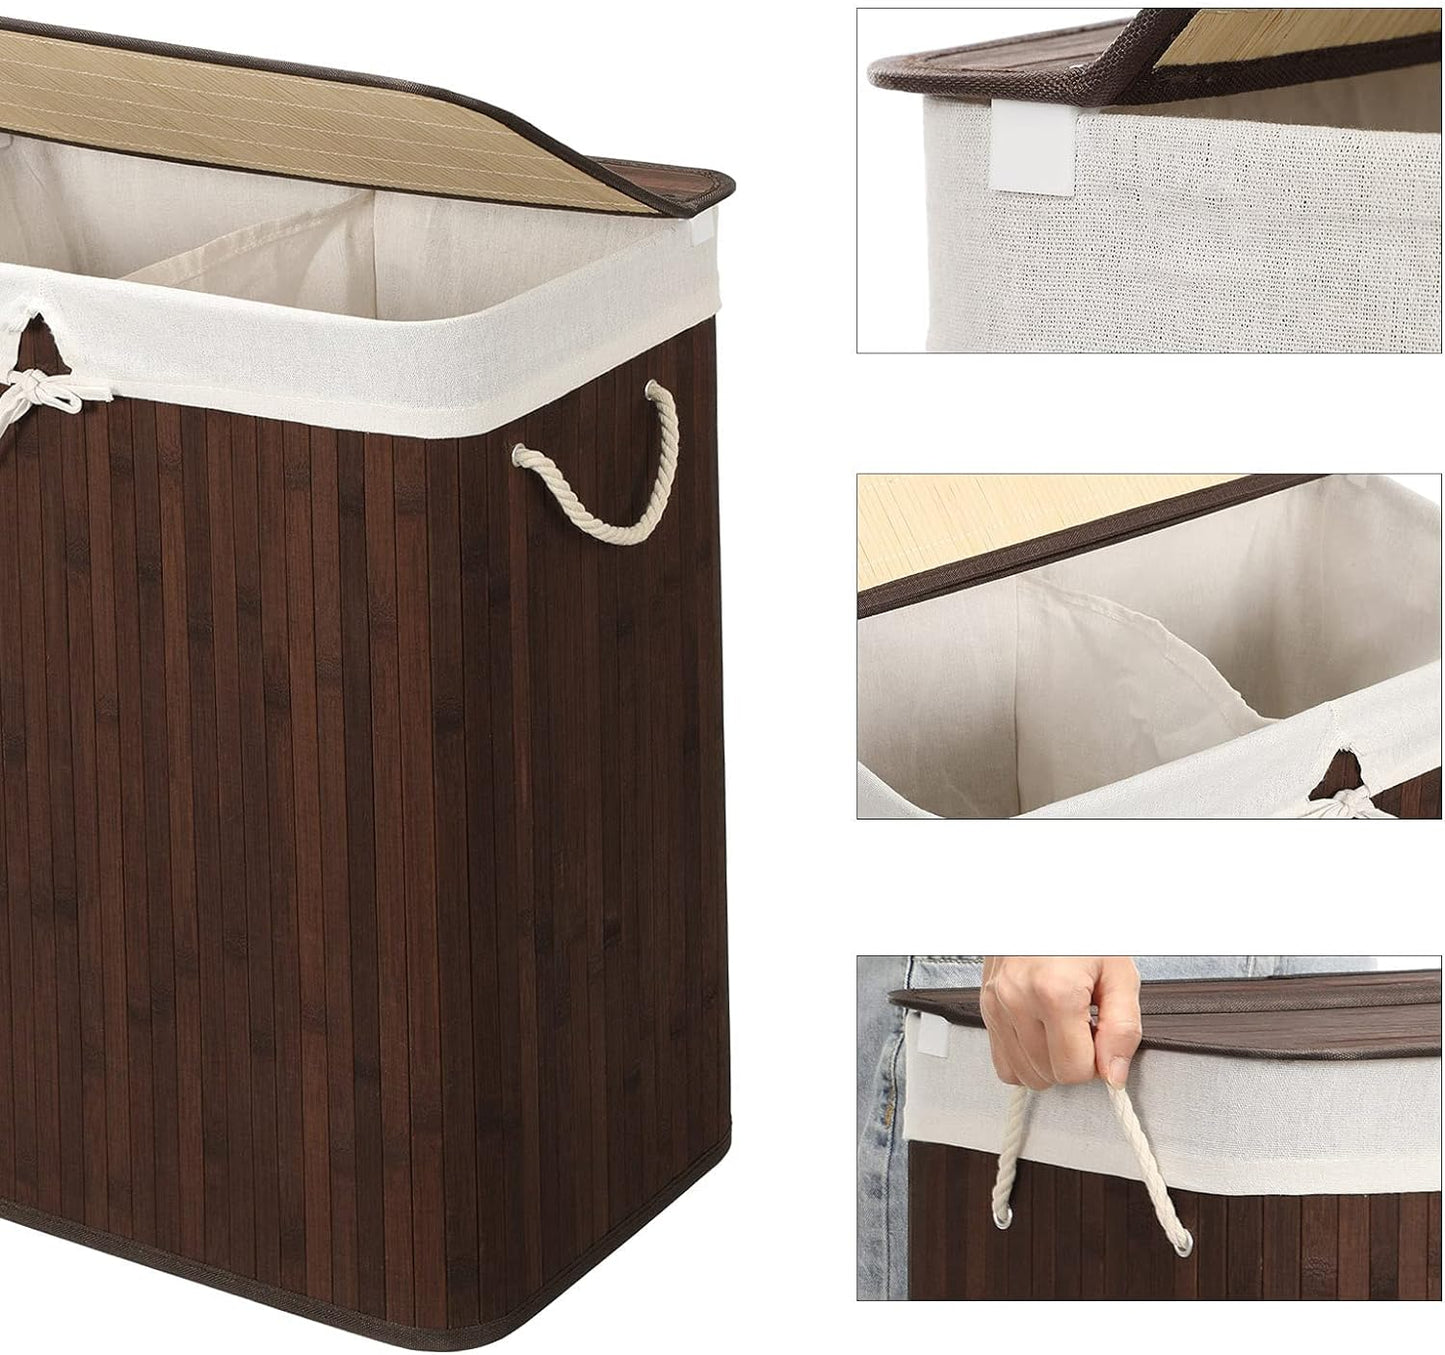 Laundry Basket with Lid, Bamboo Laundry Basket, Double Bamboo Laundry Hamper with 2 Sections, 100L, Brown, SONGMICS, 4